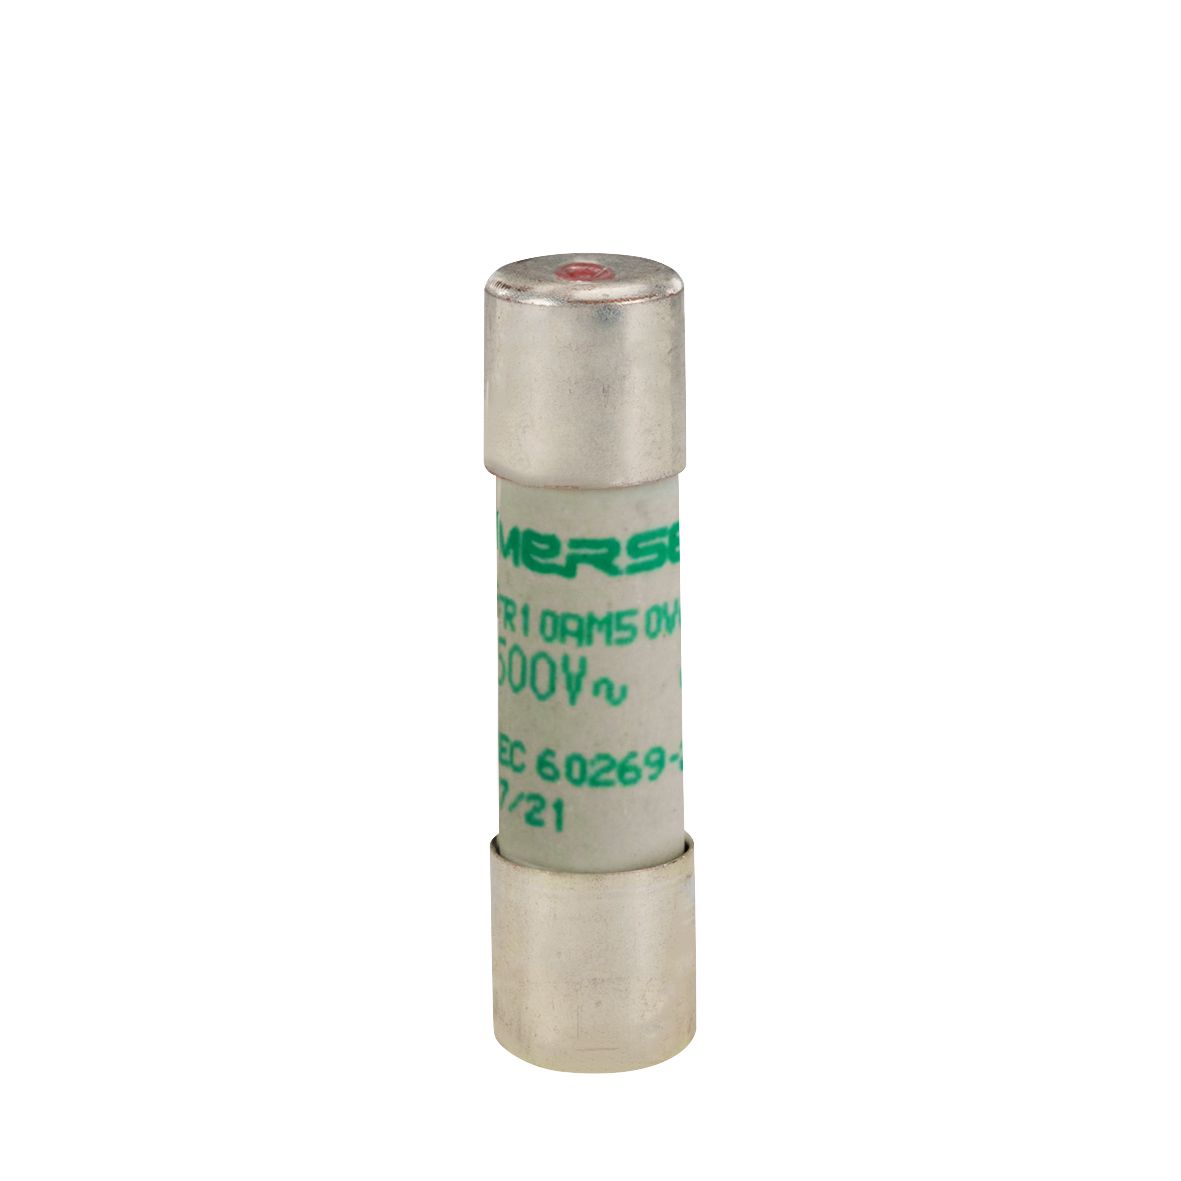 V216655 - Cylindrical fuse-link aM 500VAC 10.3x38, 20A with indicator